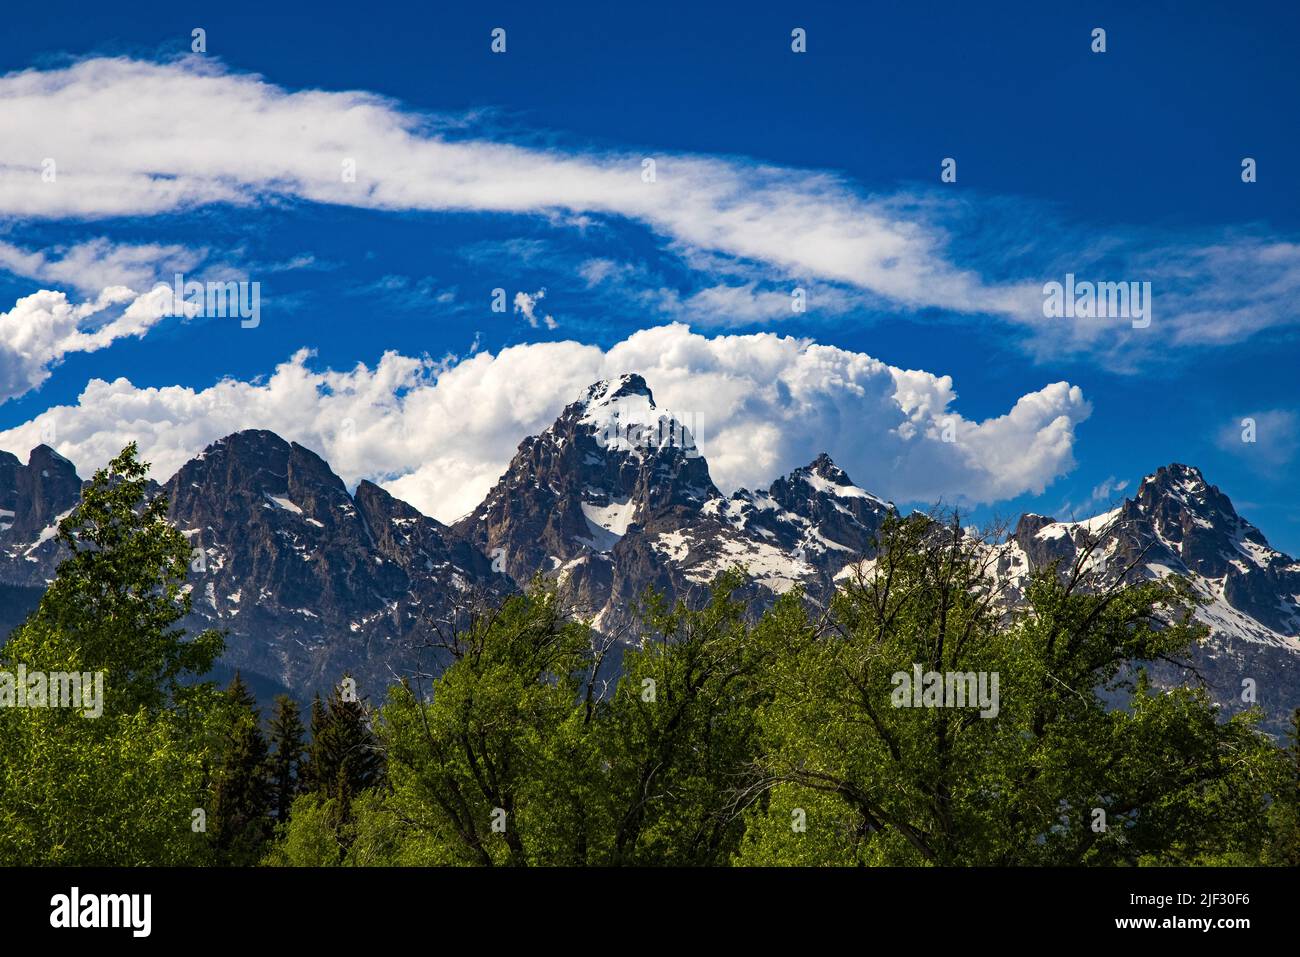 A view of Grand Teton Peak, the highest peak in the Teton Range of Grand Teton National Park, Wyoming, USA. This view is from the park Visitor Center. Stock Photo